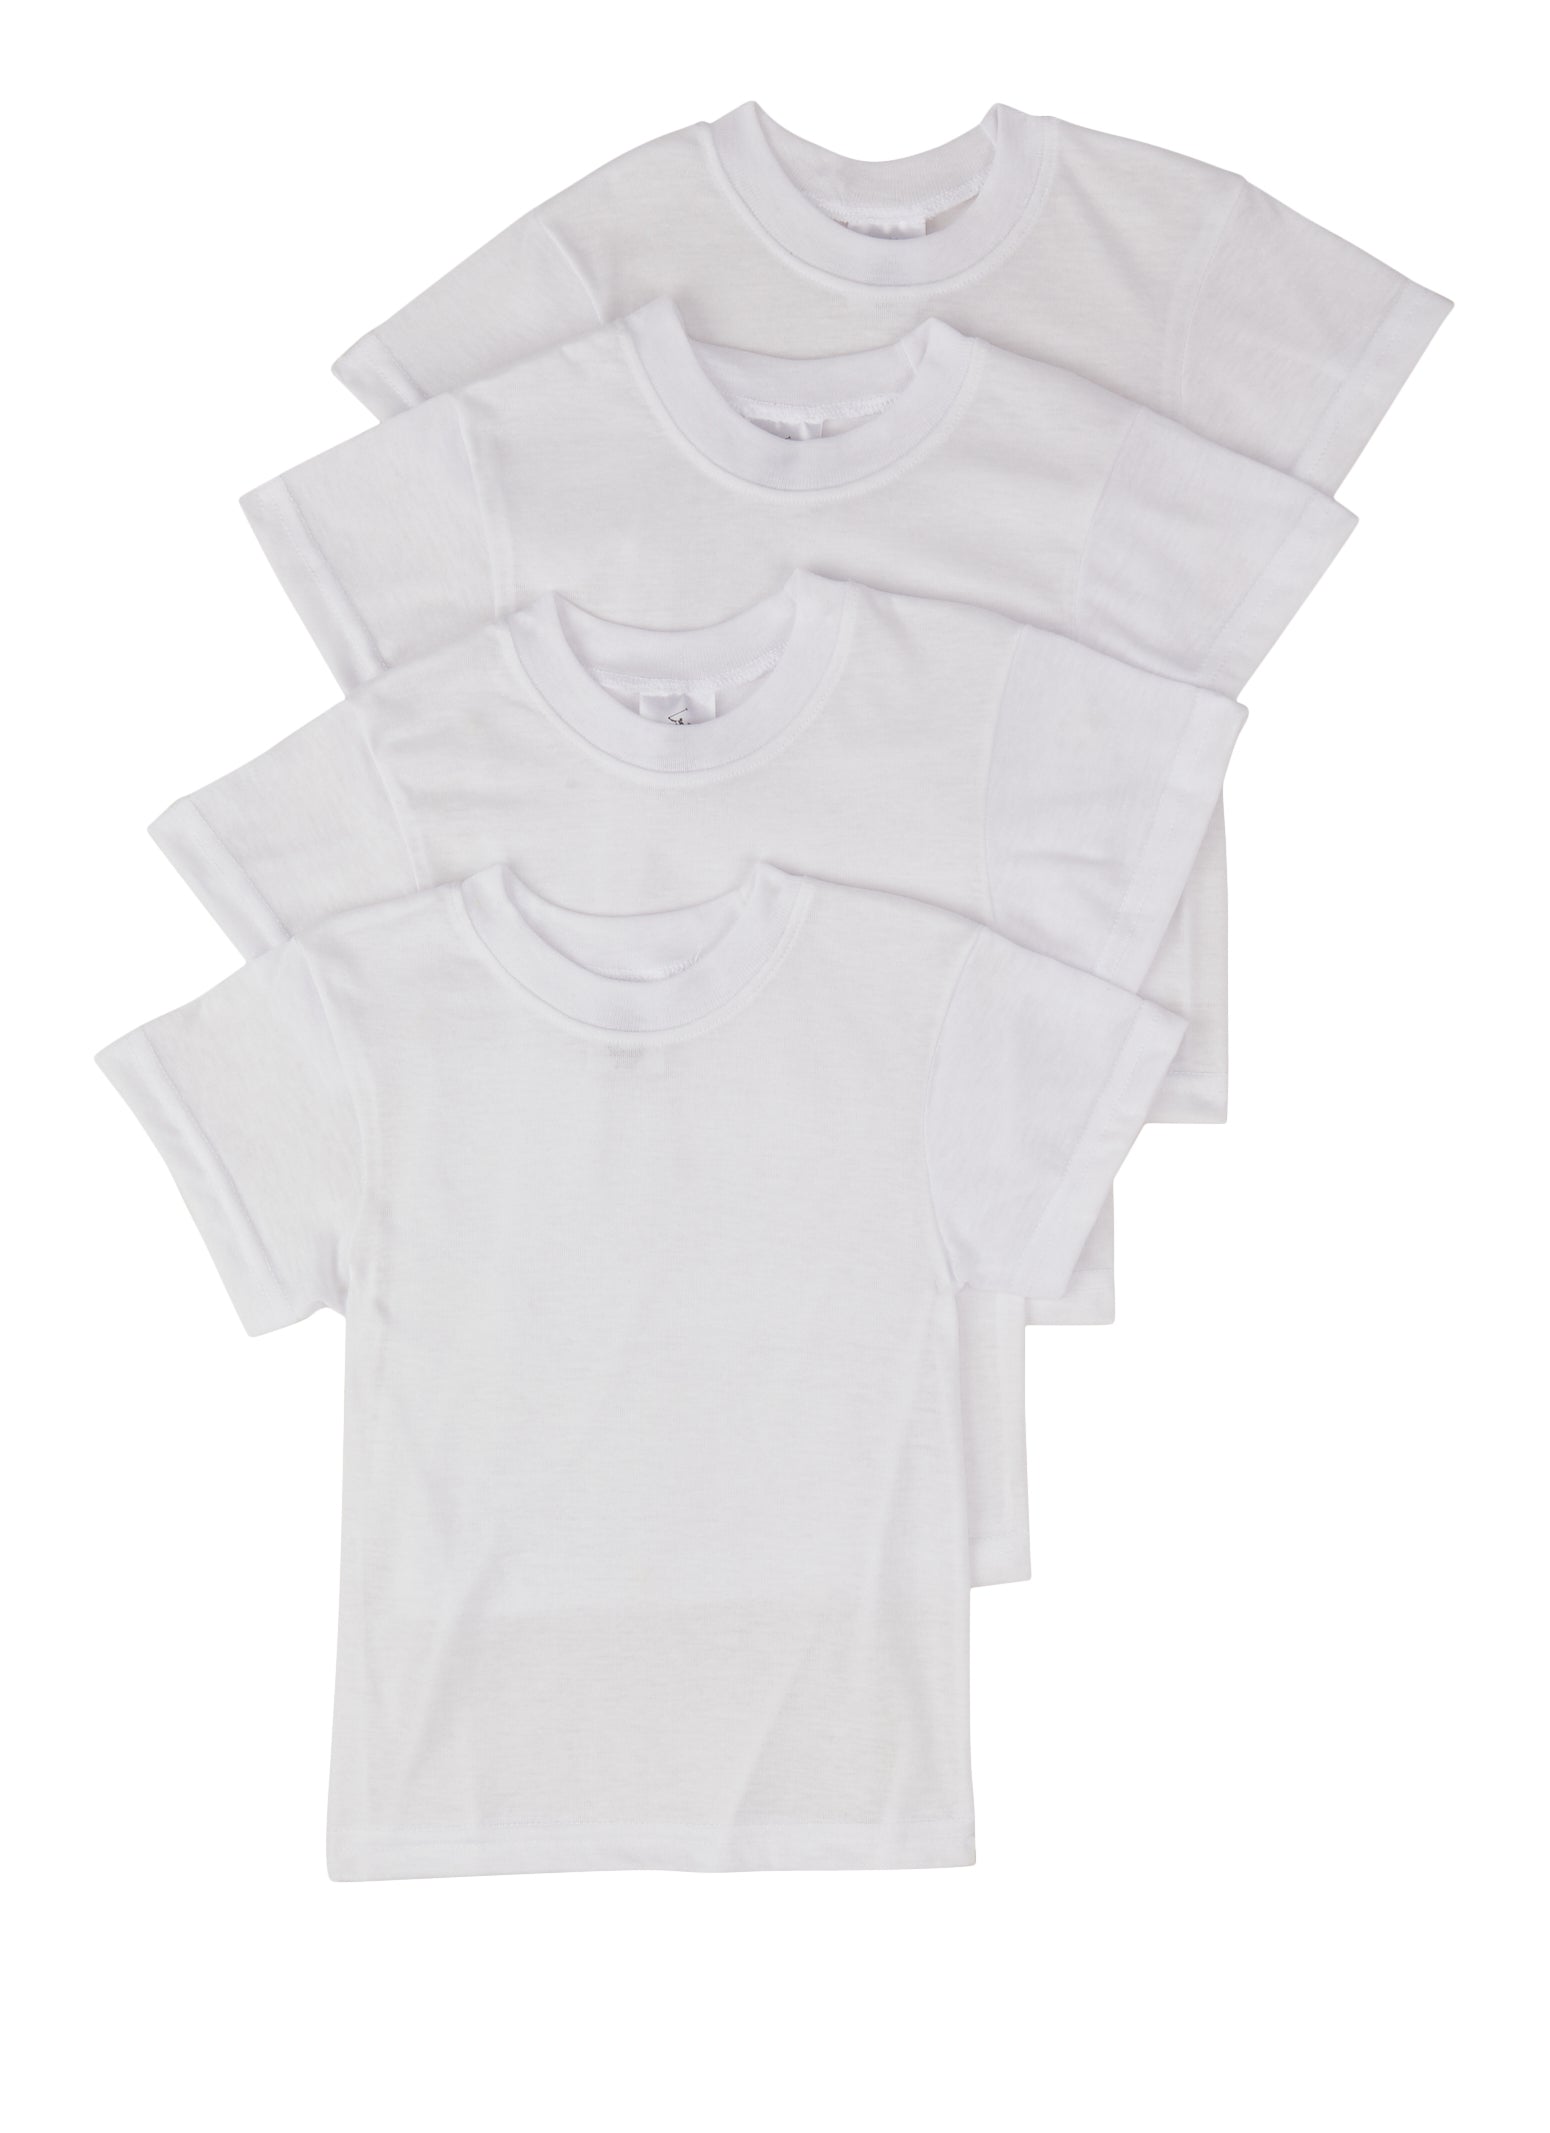 Toddler Boys Crew Neck Tees 4 Pack, White, Size 2T-3T